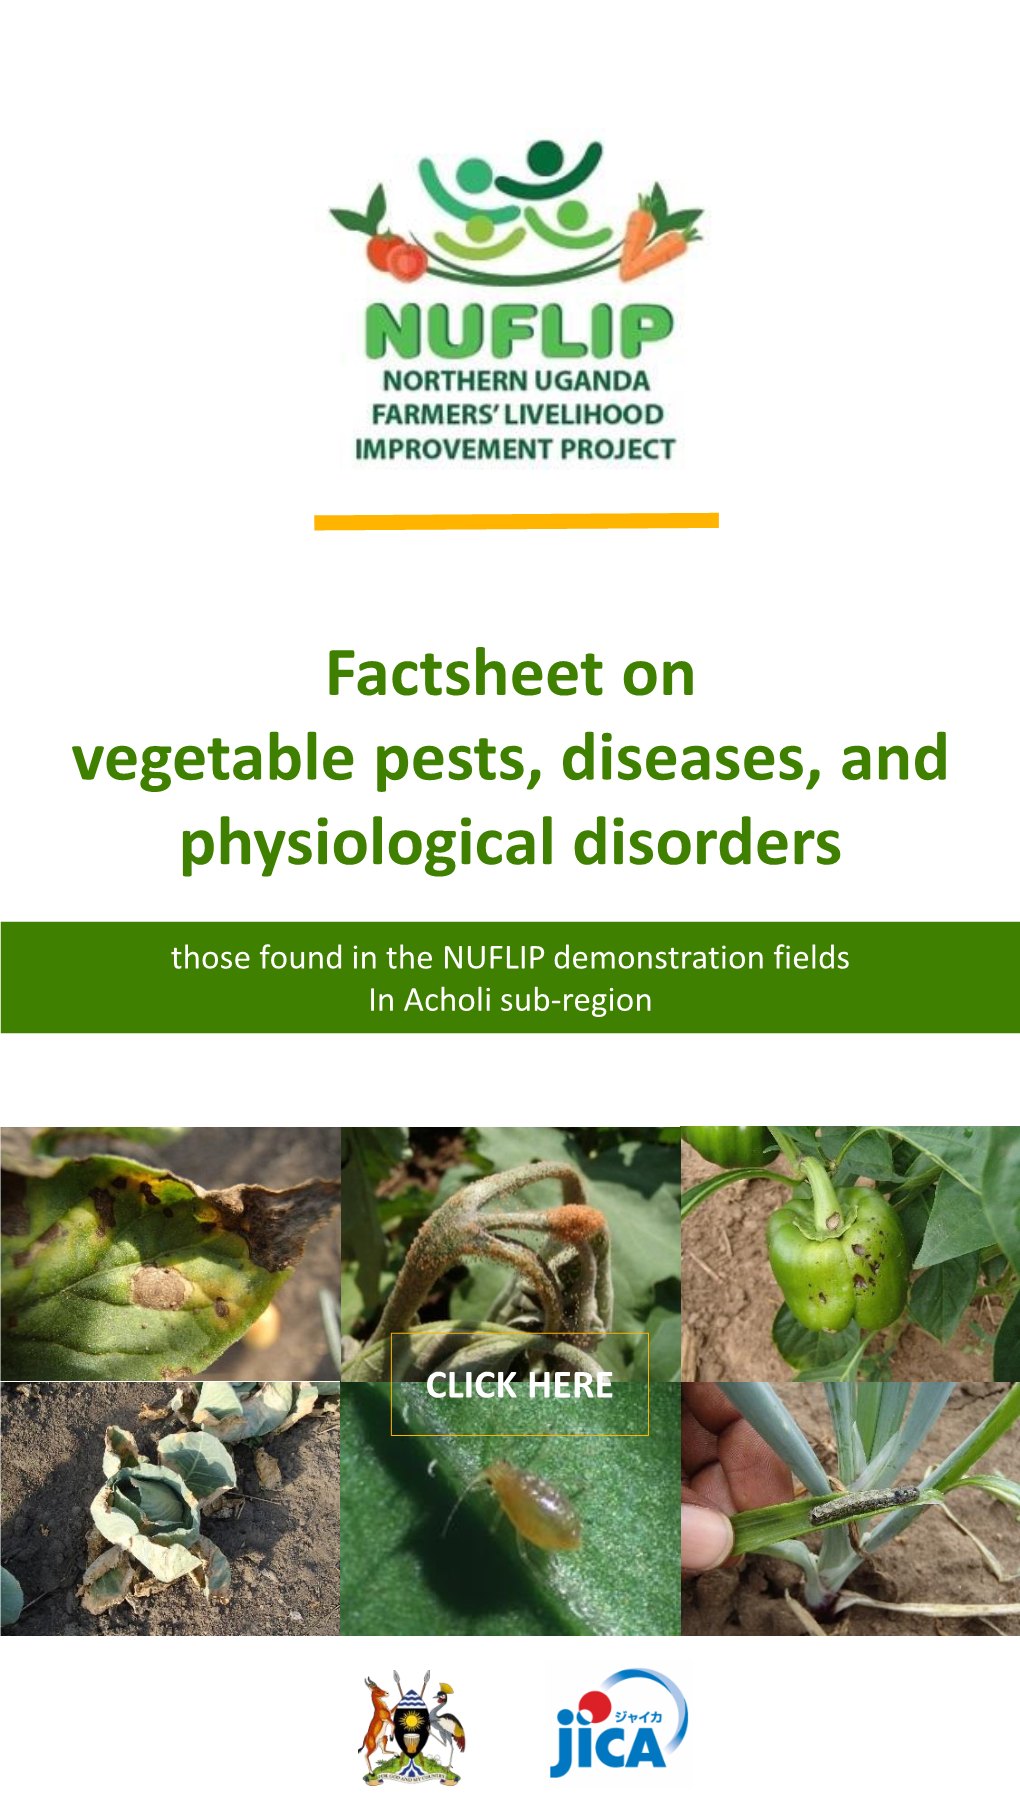 Factsheet on Vegetable Pests, Diseases, and Physiological Disorders